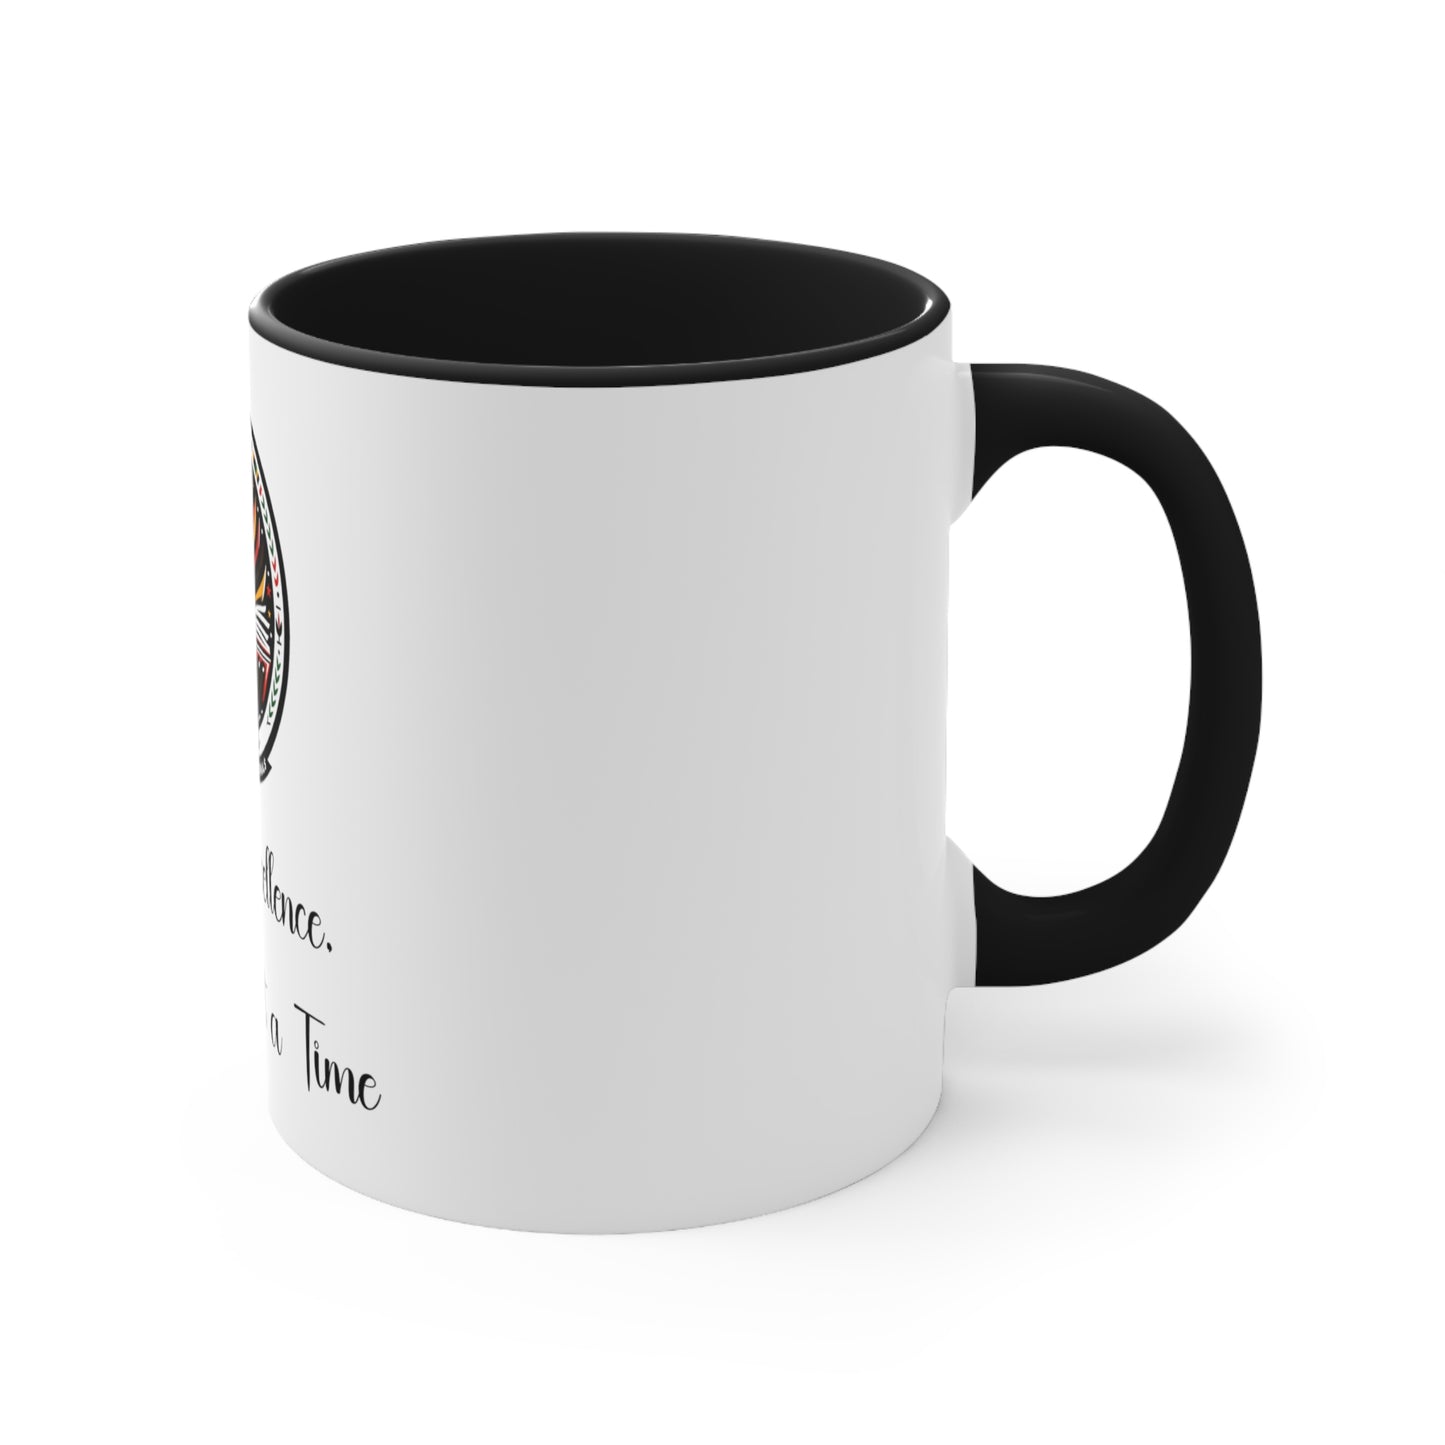 Black Excellence, One Sip at a Time, Two-Tone Accent Coffee Mug, 11oz, Joyous Life Journals